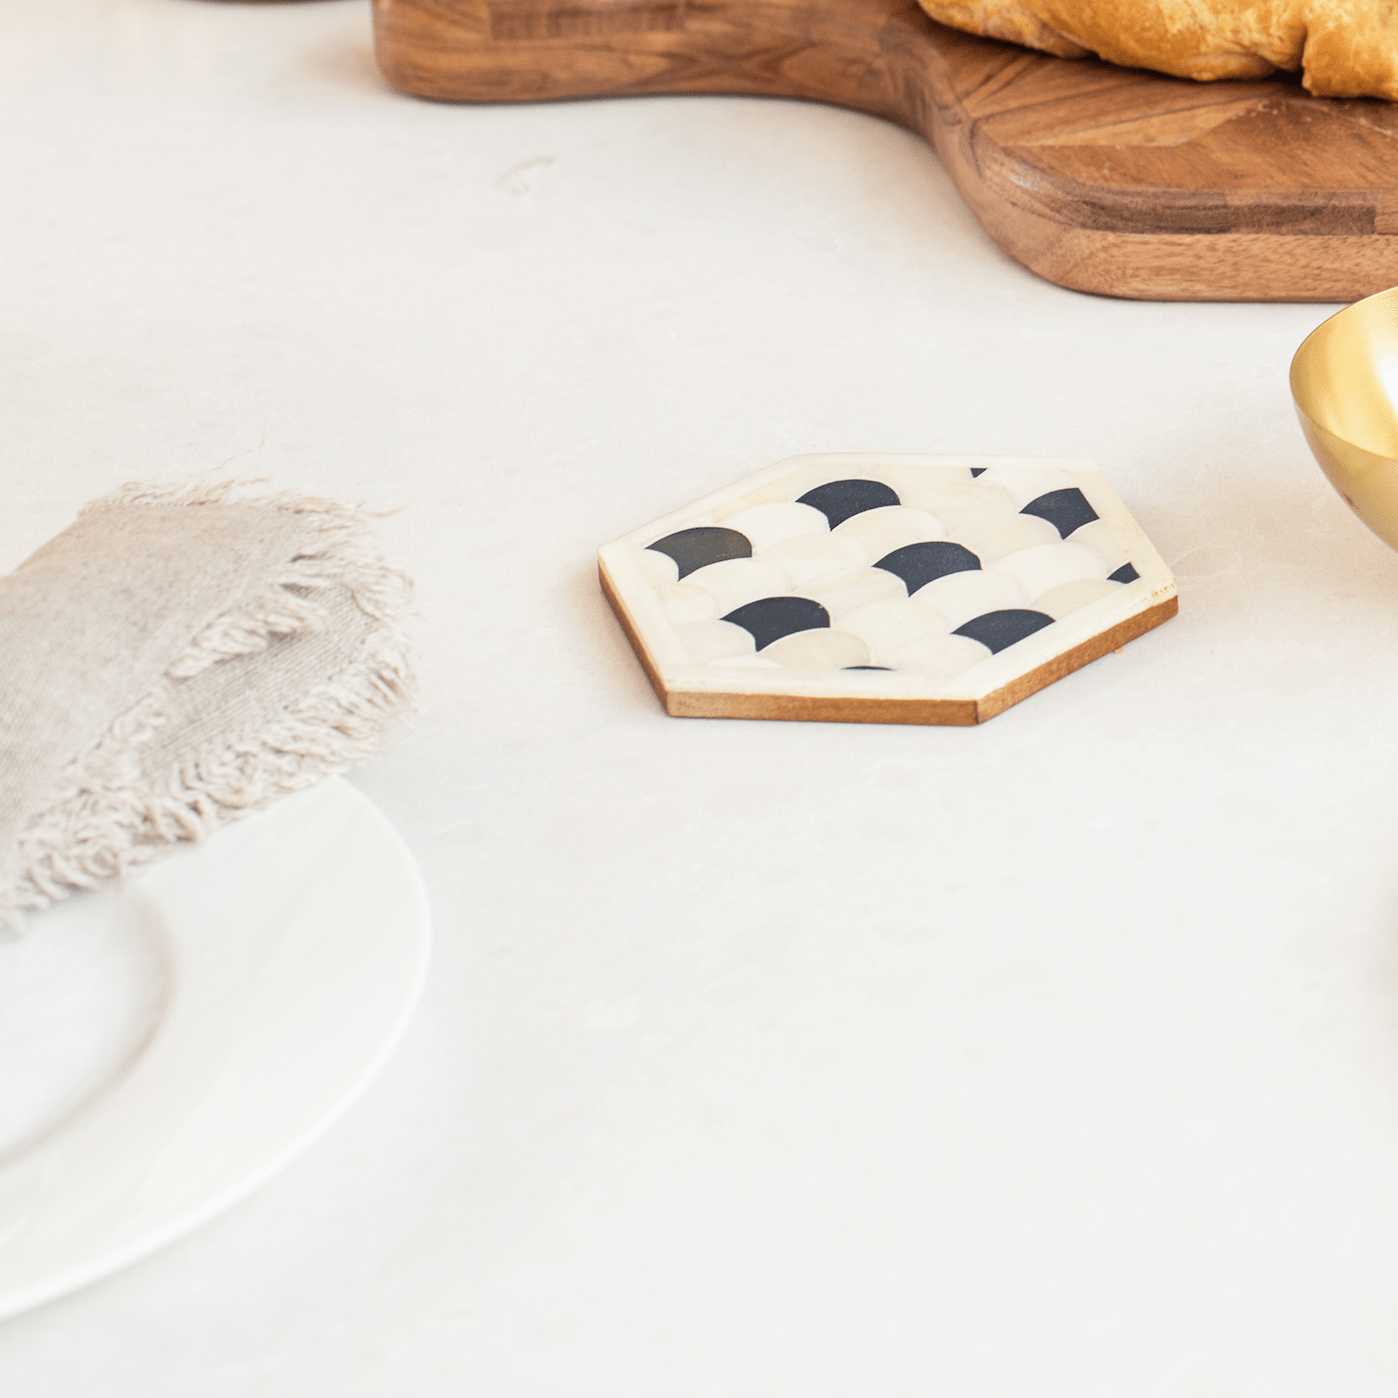 Stylish blue and white scalloped coasters home decor and accessories for your coffee table and dining room blue and white wood bone